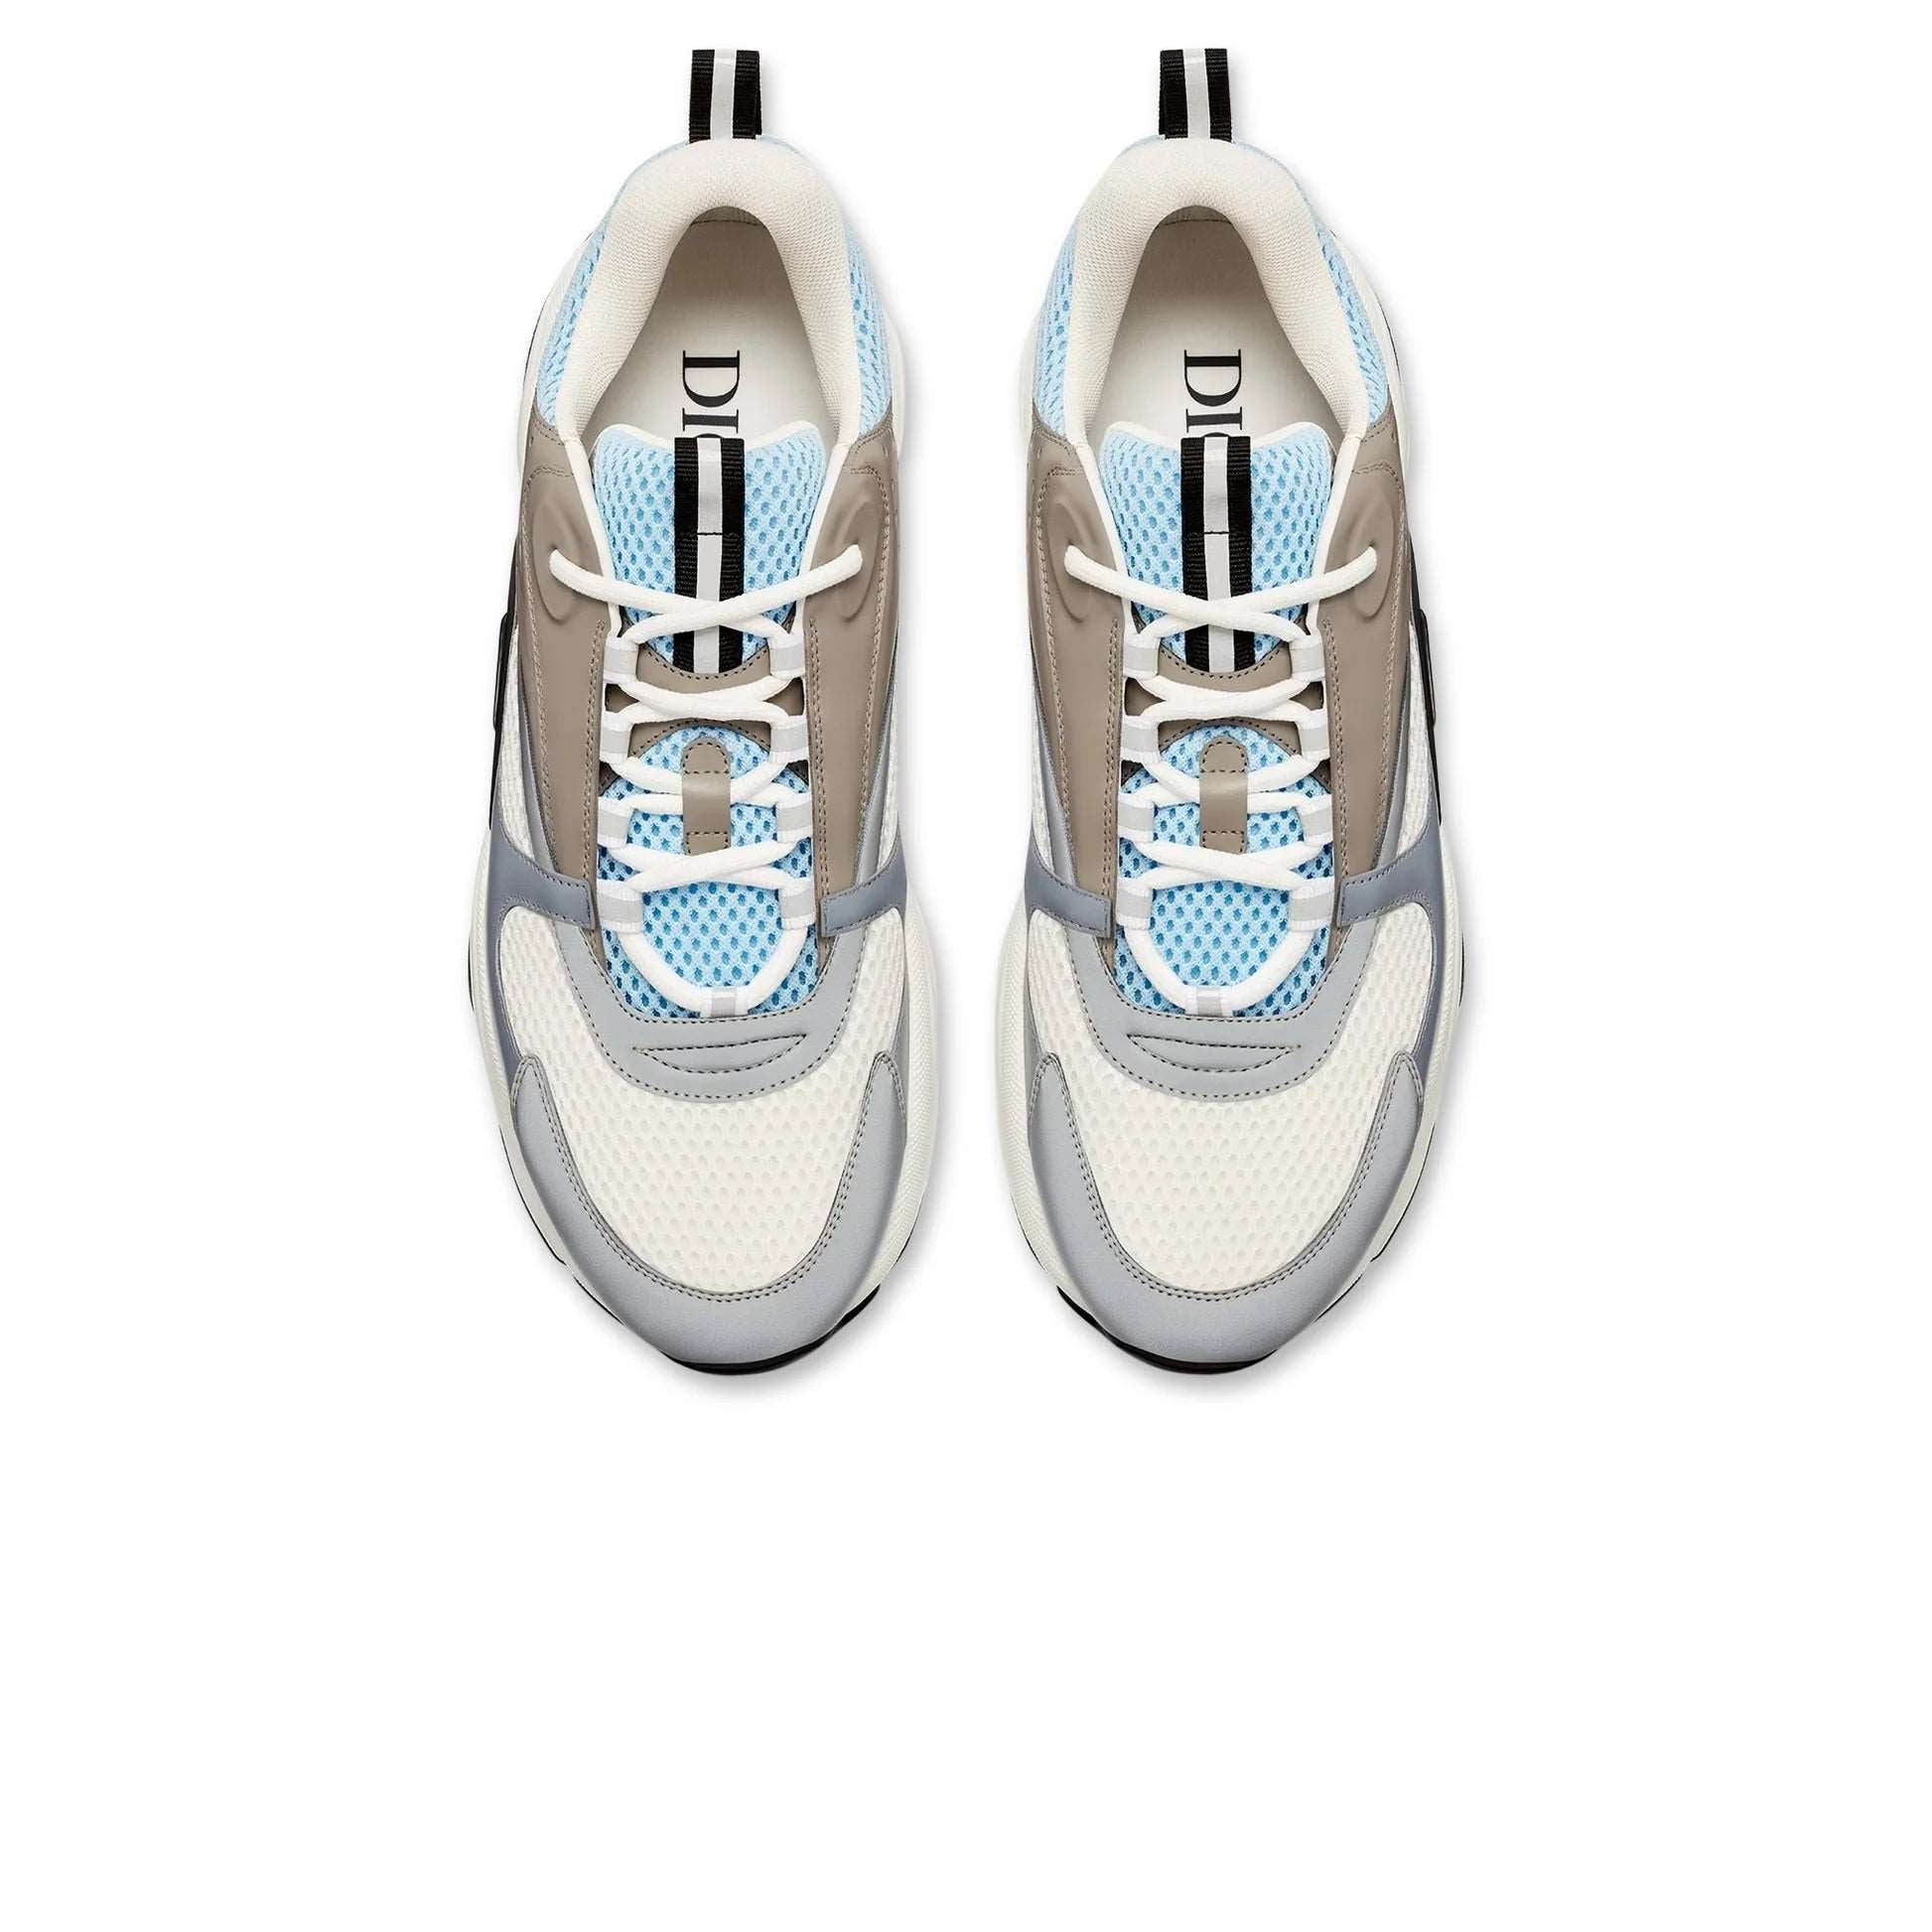 Dior B22 Sky Blue And Grey Trainer